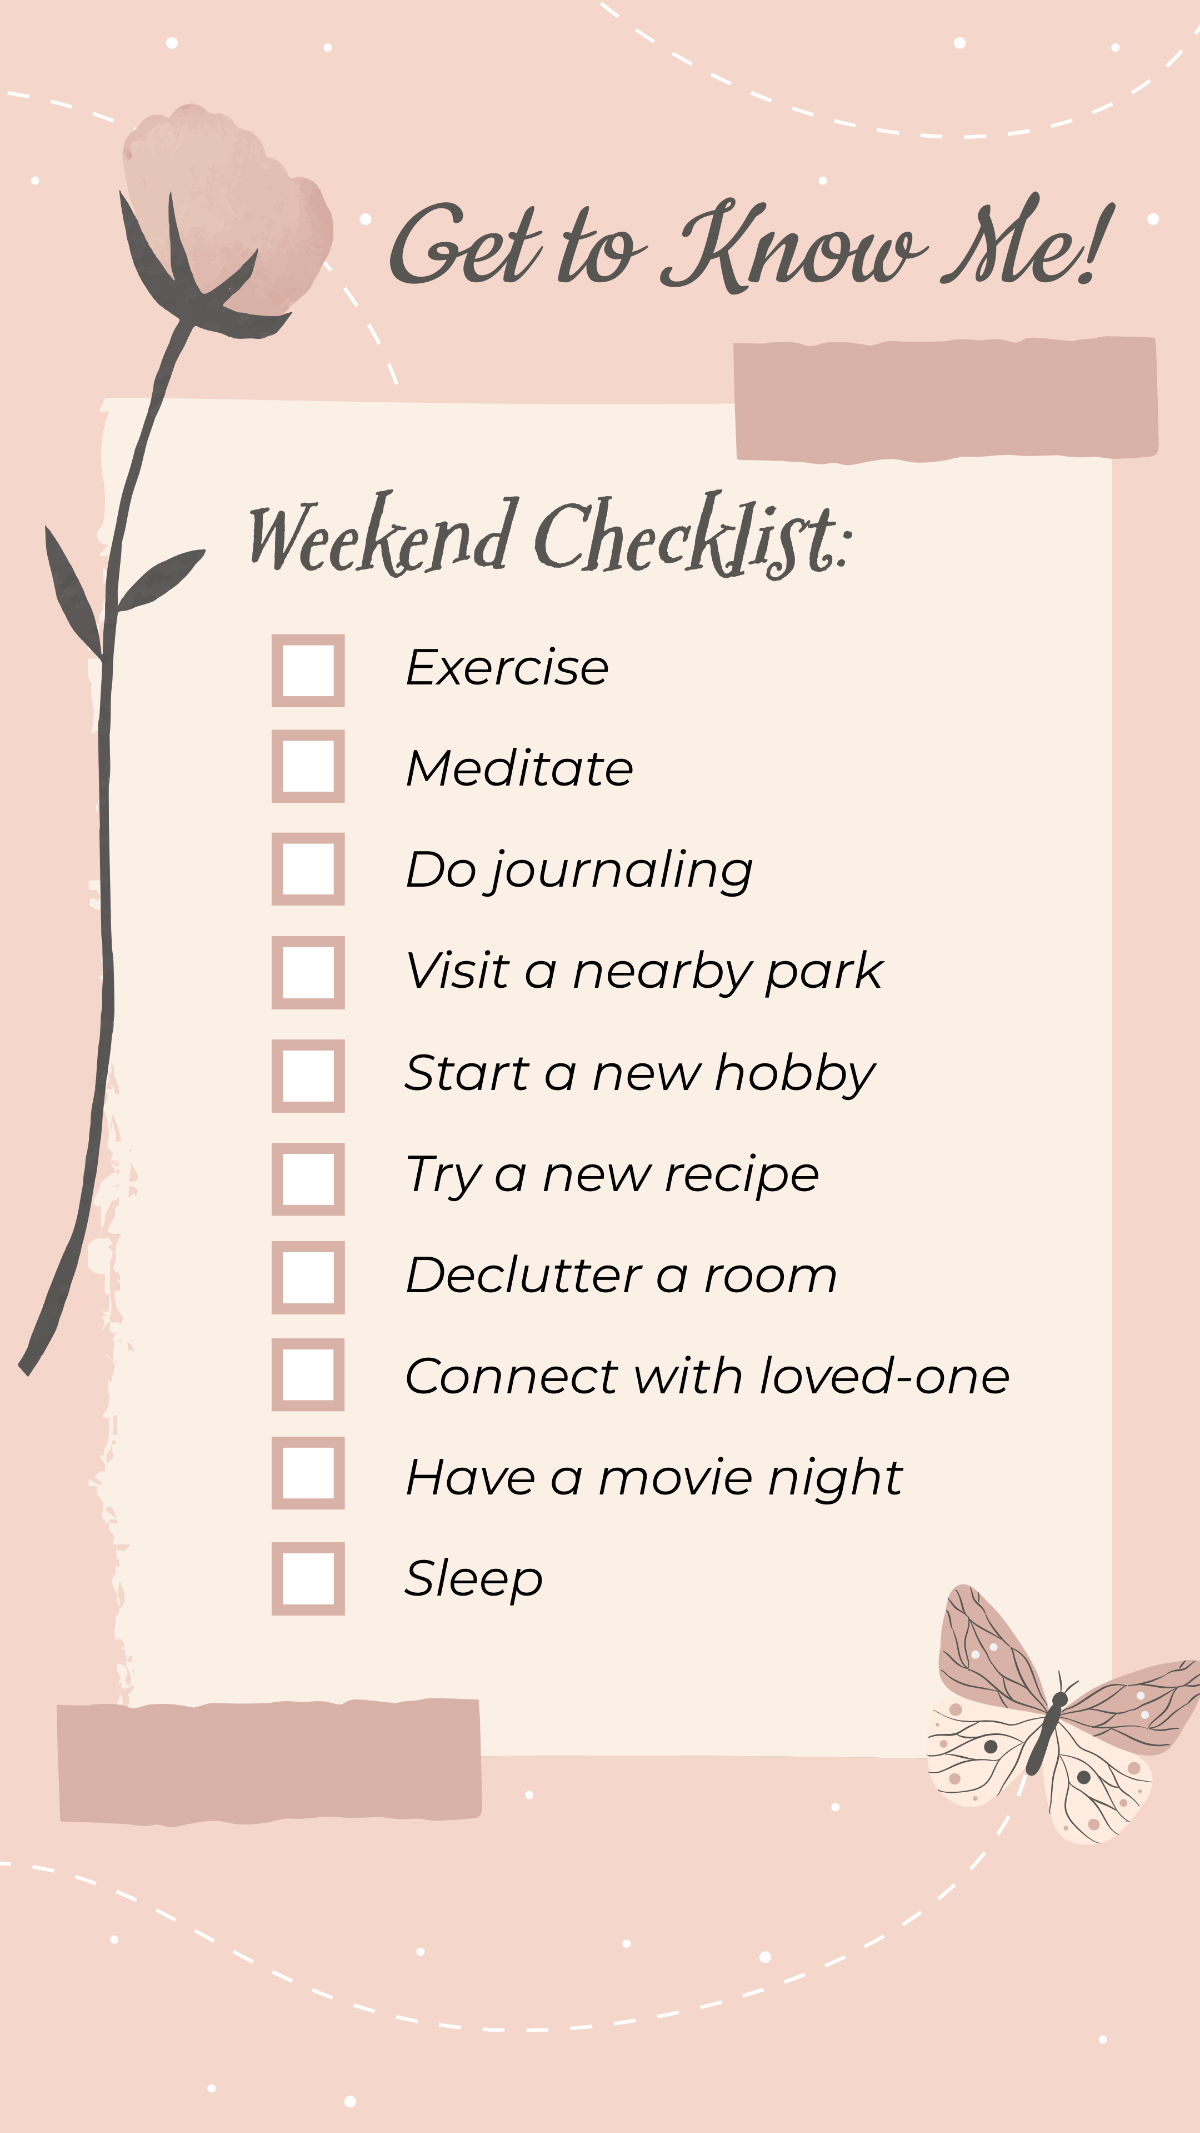 Free Get to Know Me Weekend Checklist Instagram Story Template